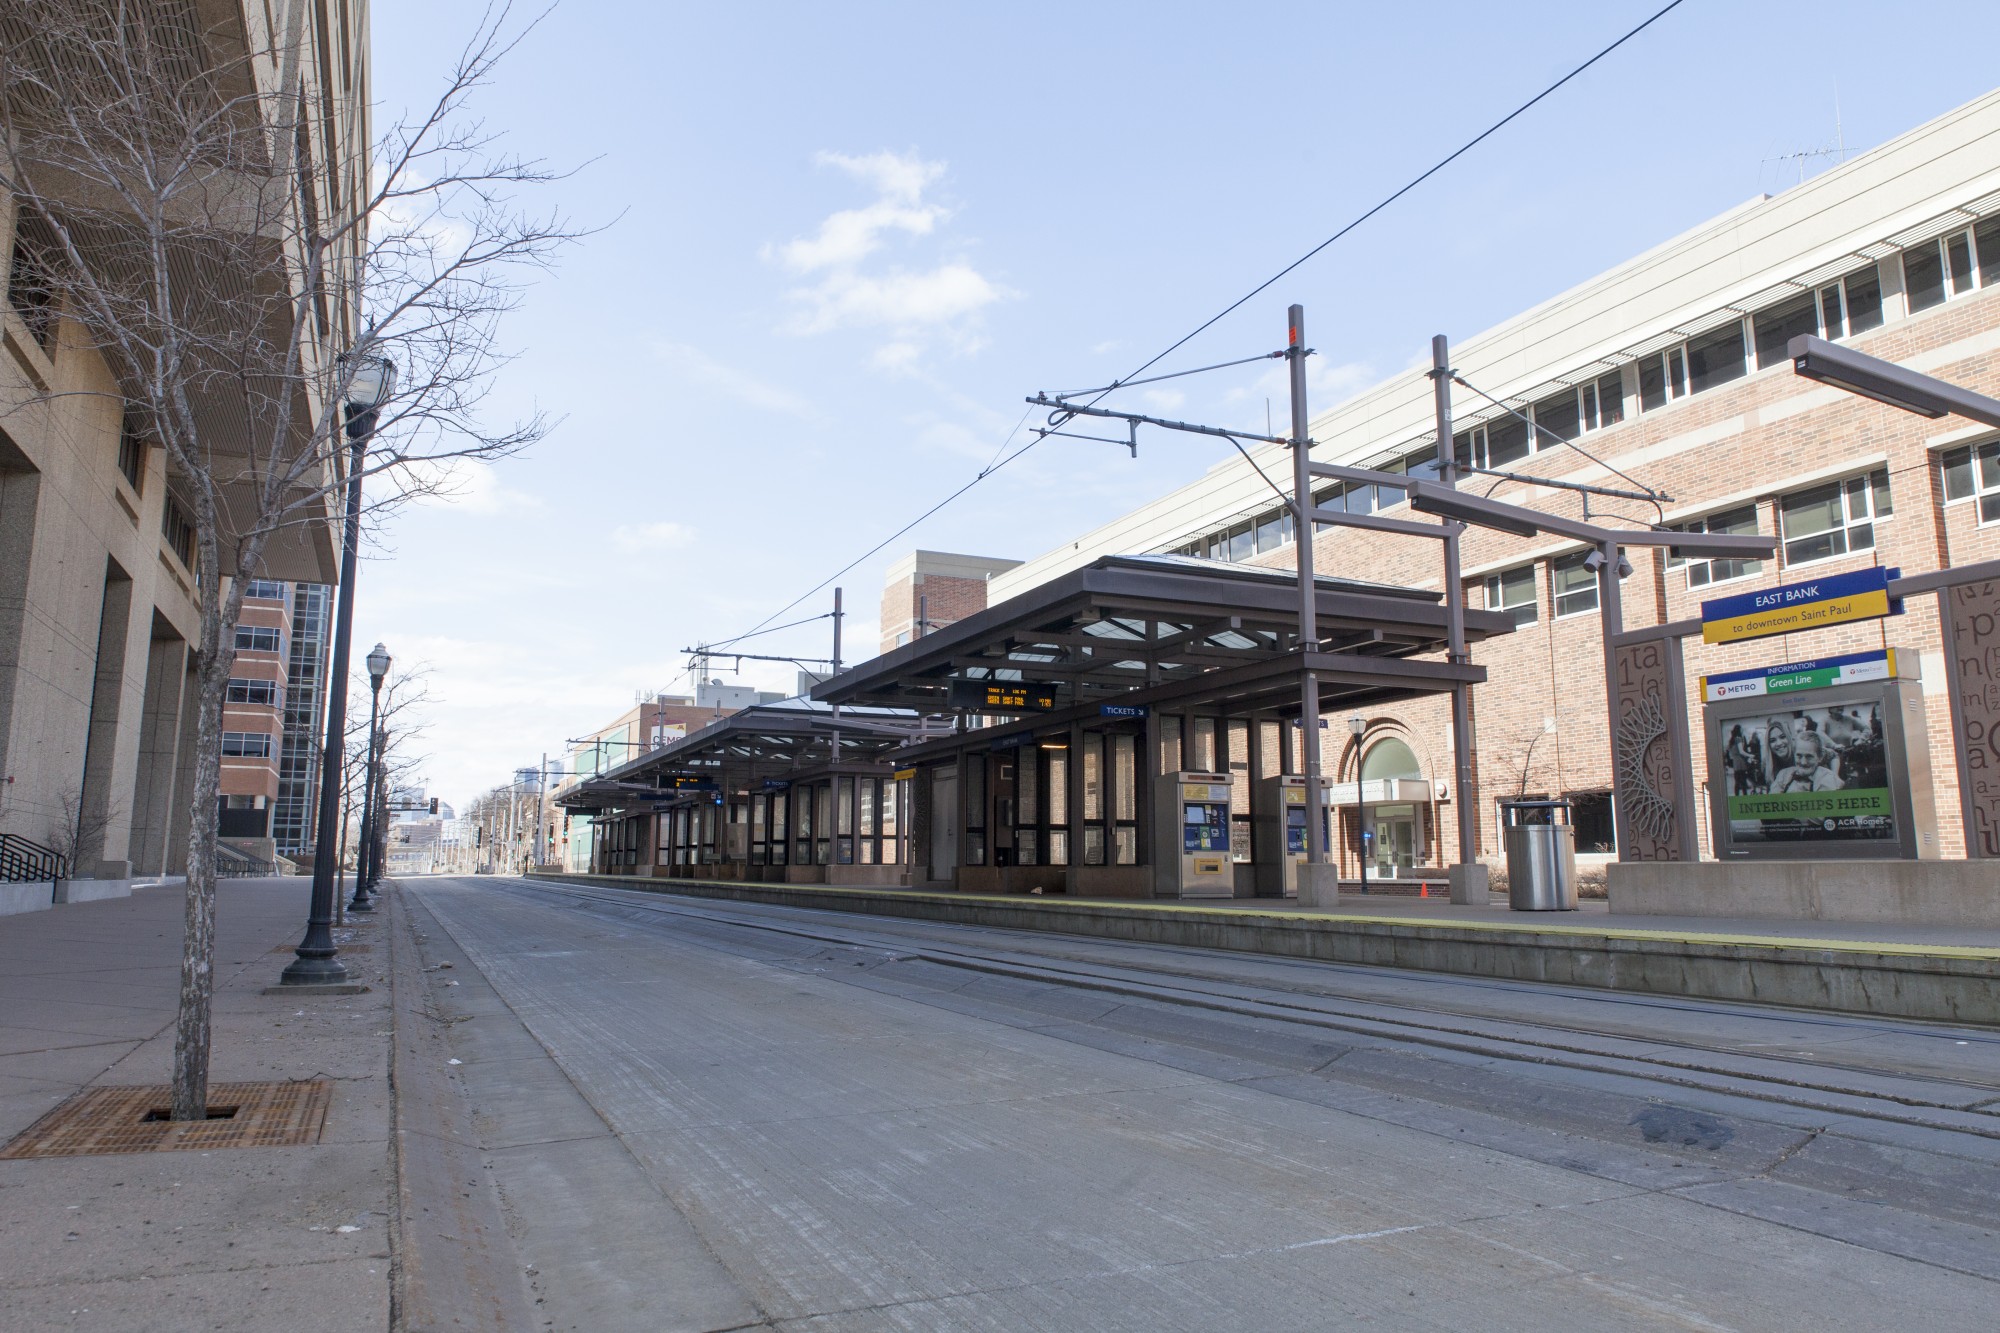 The East Bank light rail station stands empty on Saturday, March 21.